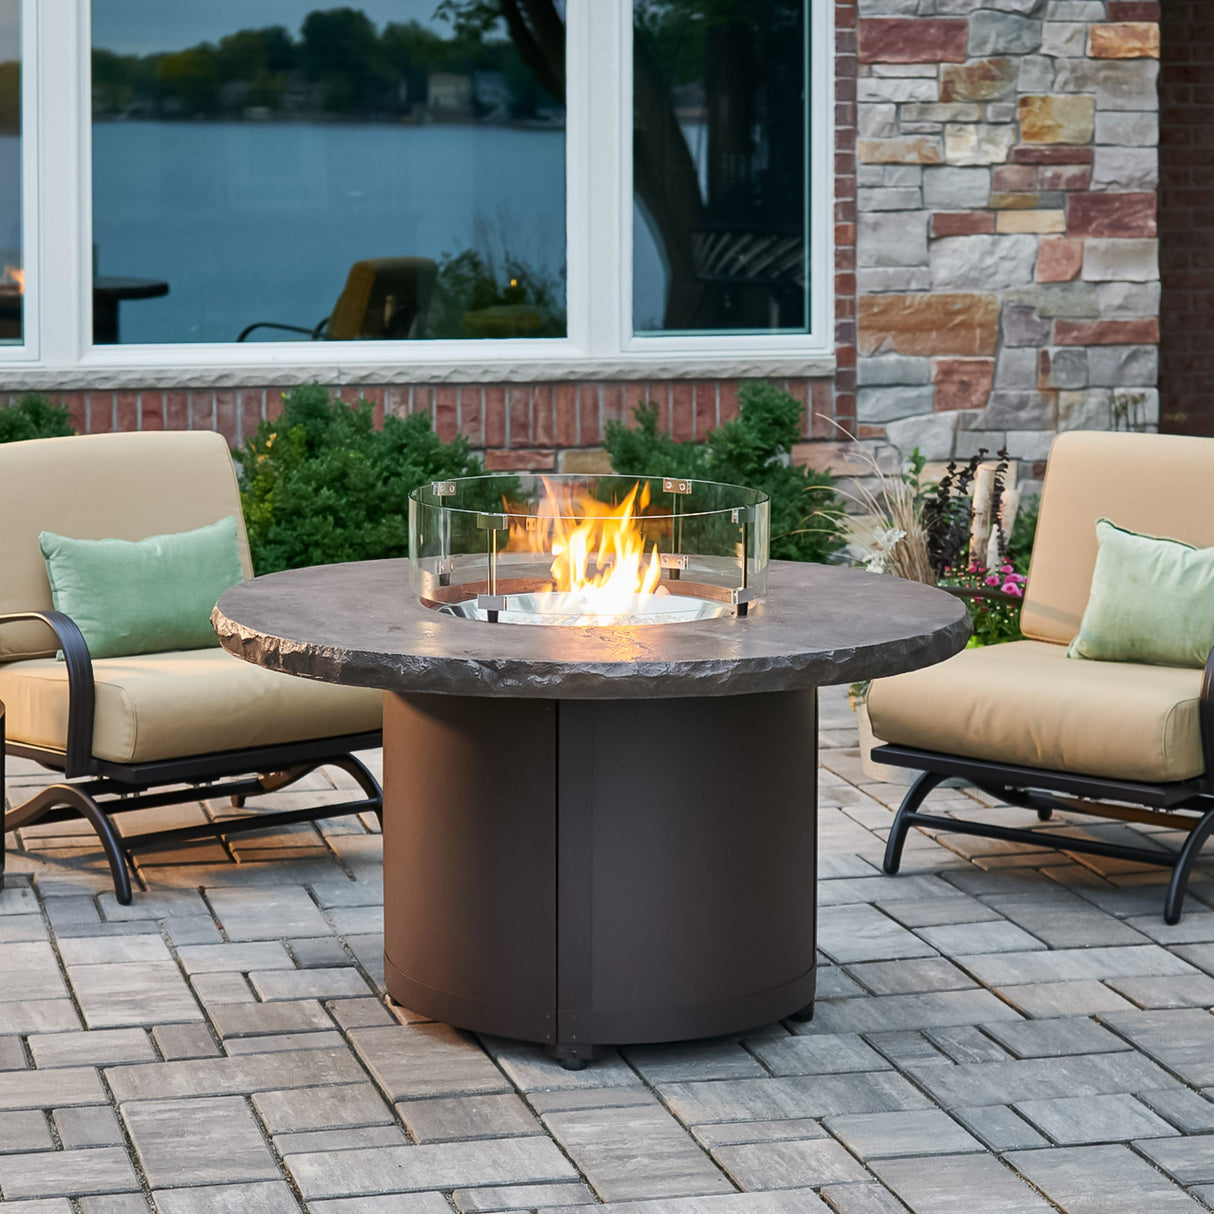 The Marbleized Noche Beacon Round Gas Fire Pit Table outside with a round glass wind guard protecting the flame